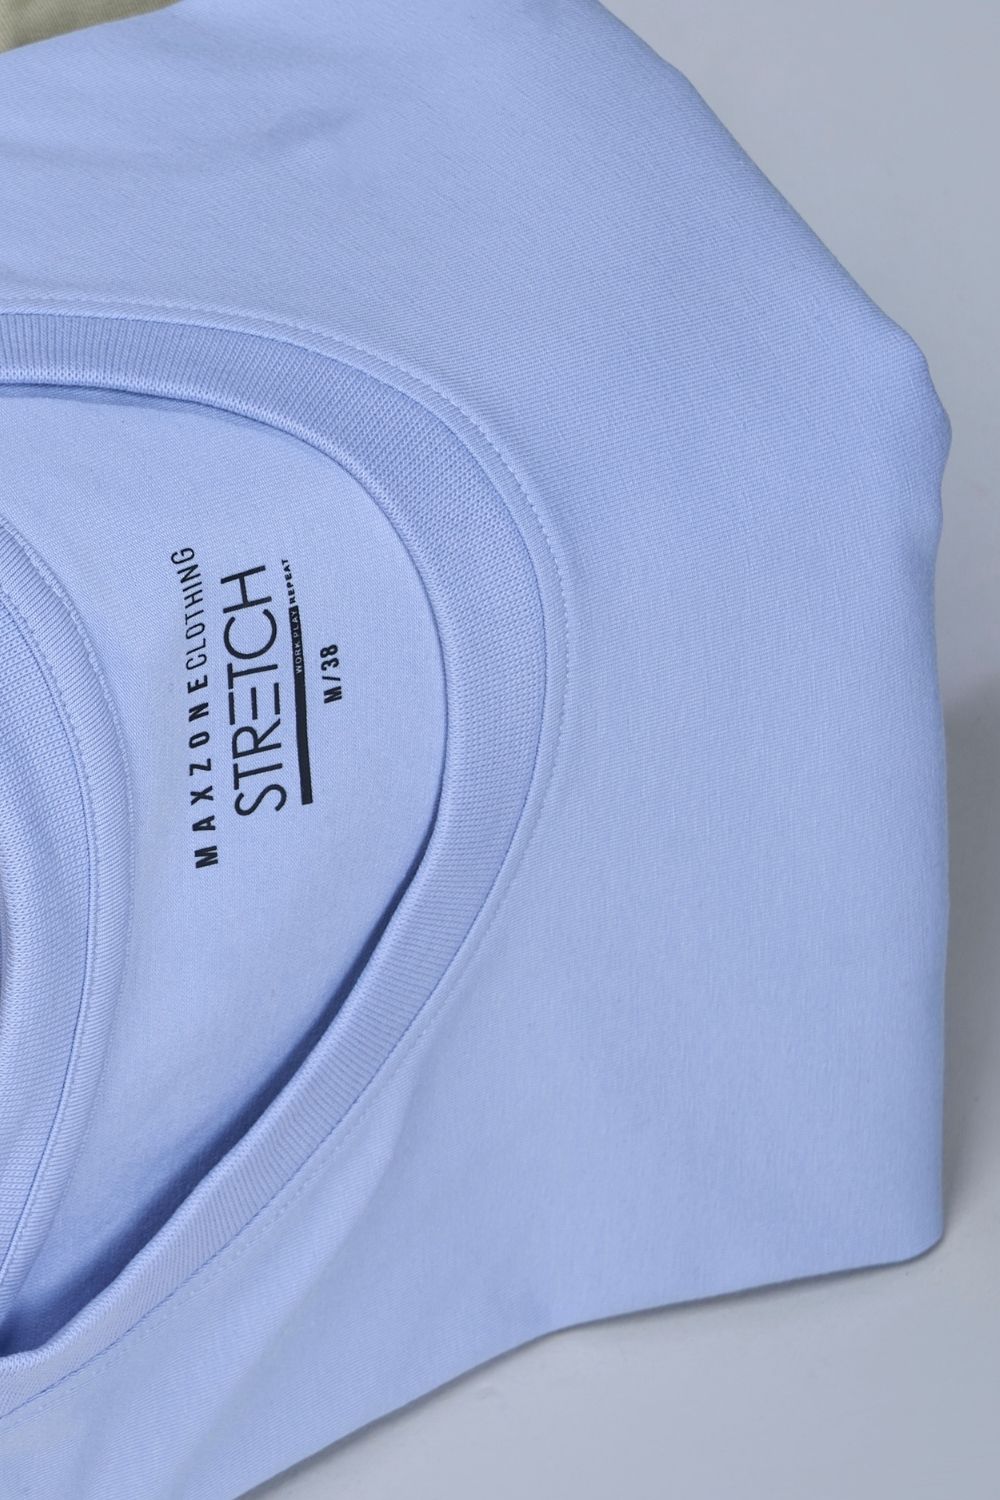 Cotton Stretch T shirt for men in the the solid color Powder Blue with half sleeves and round neck, product close up.